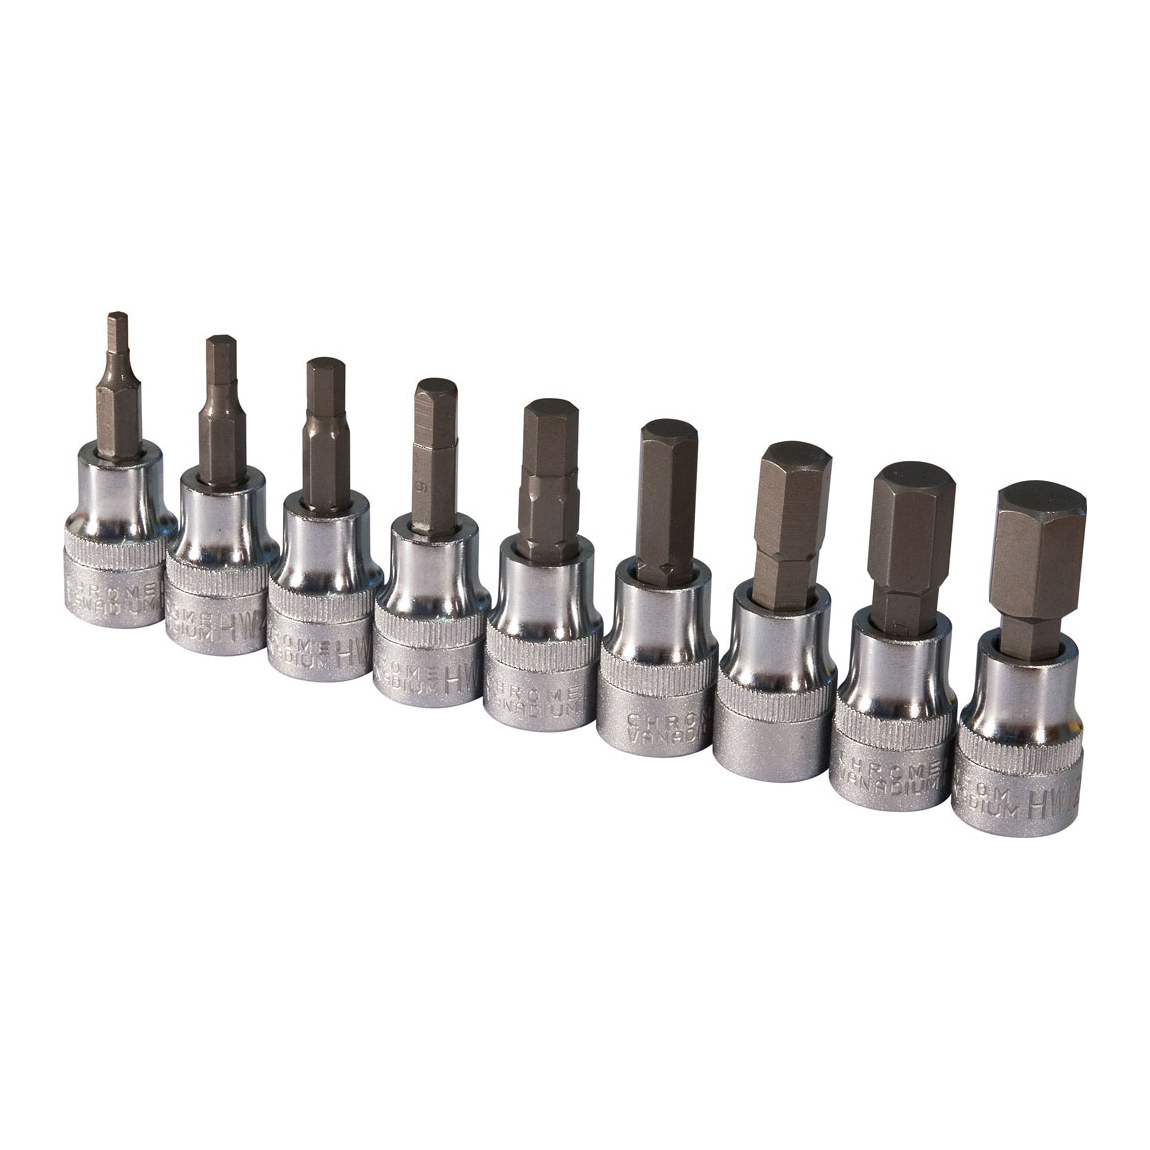 9 Piece Metric 3/8 Drive In-Hex Socket Set - SIDCHROME Tools & Tool Storage